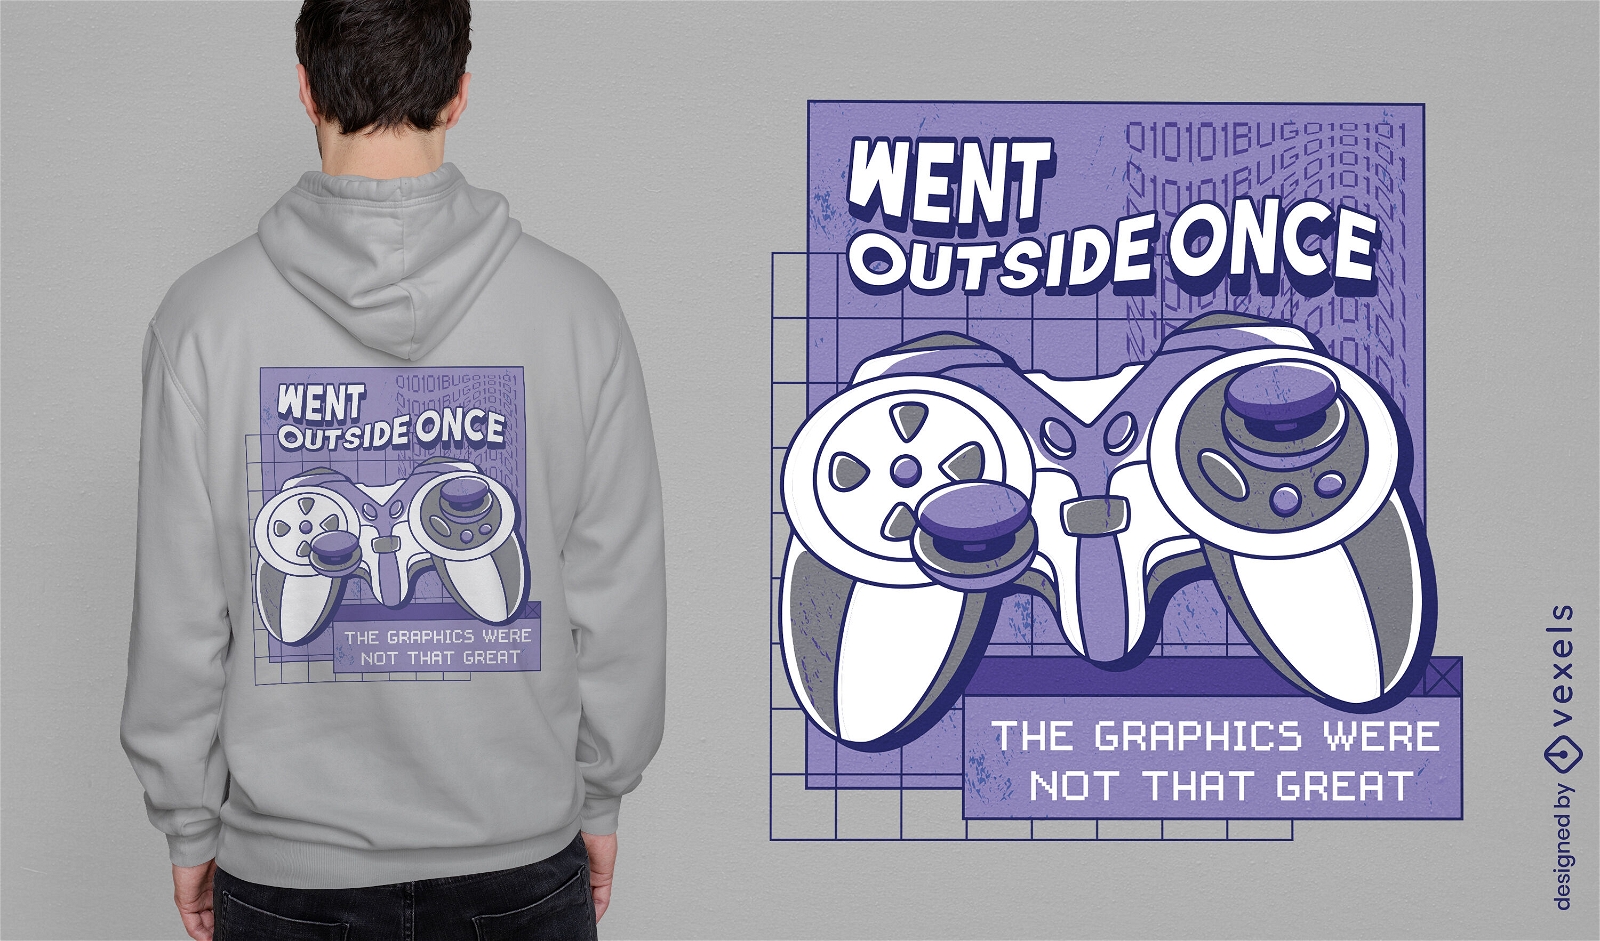 Funny gamer quote t-shirt design